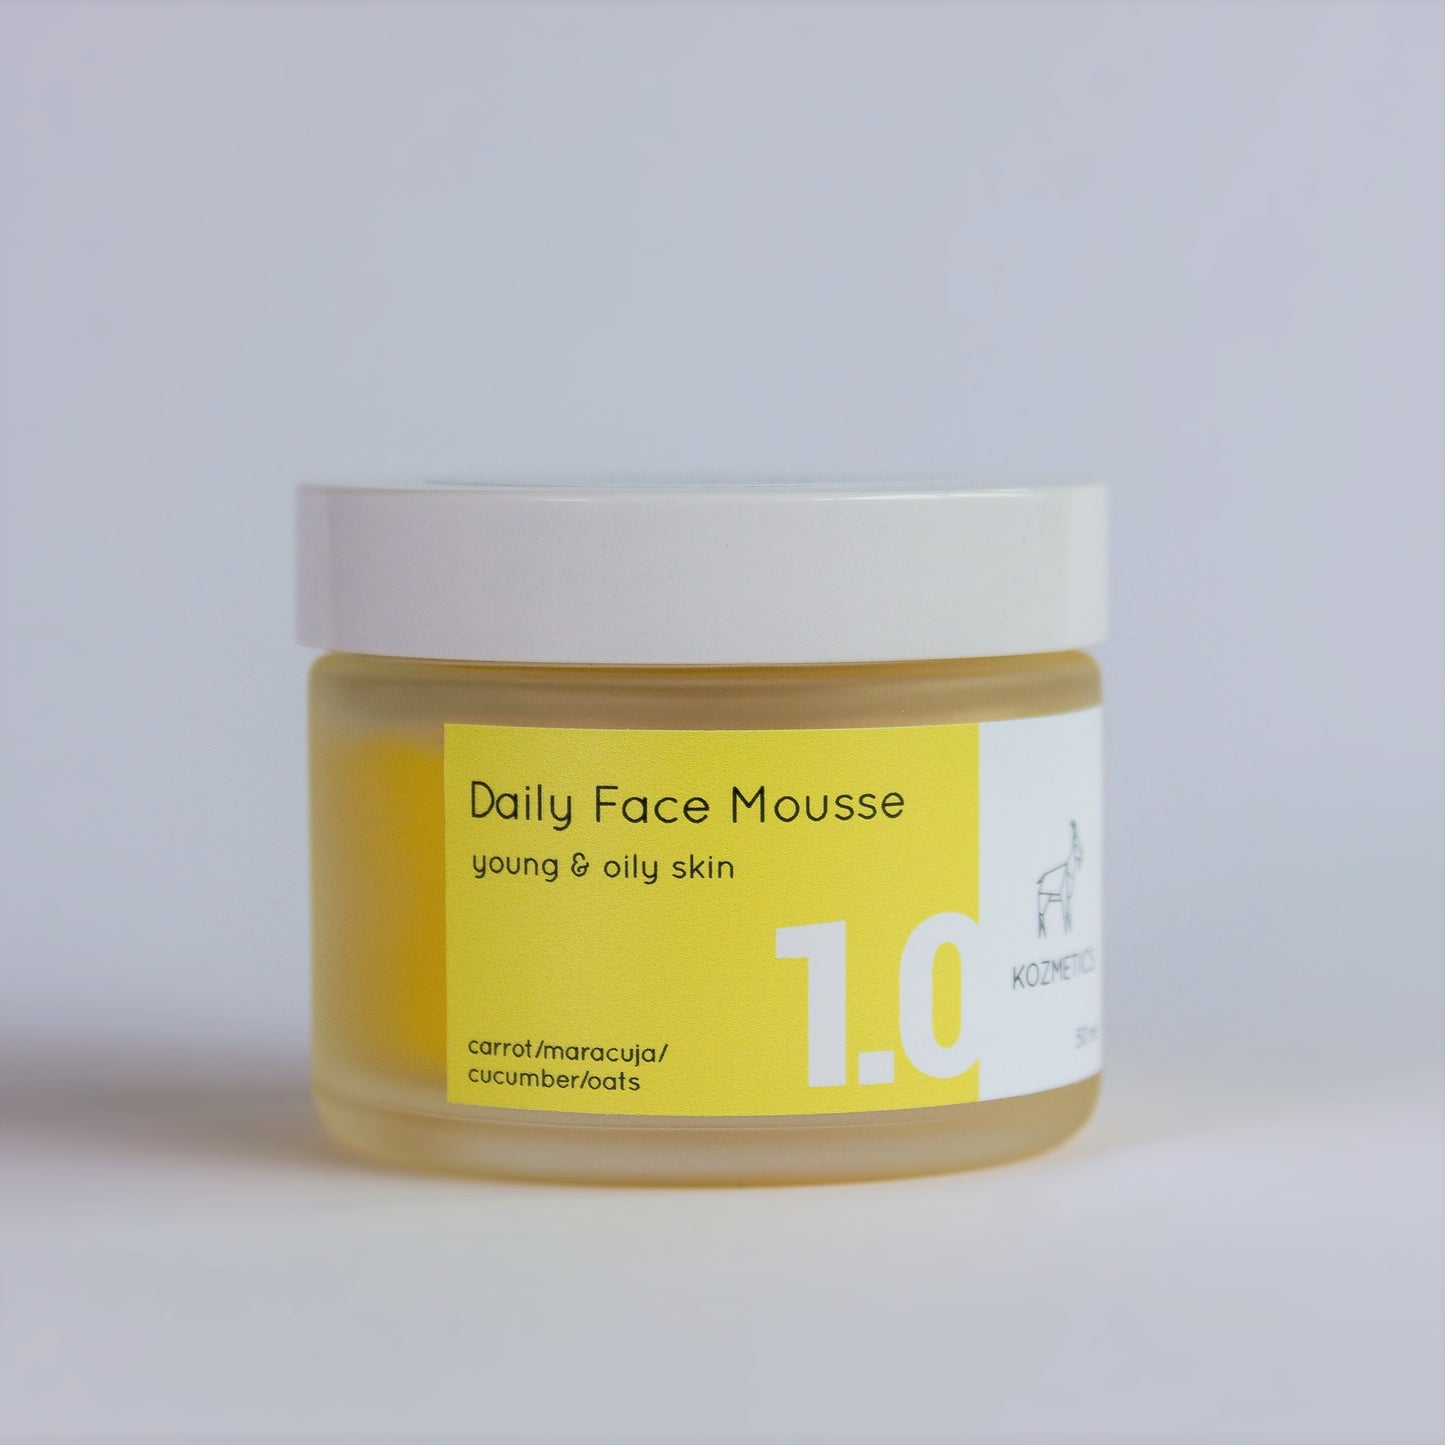 Daily Face Mousse 1.0 for Young and Oily Skin